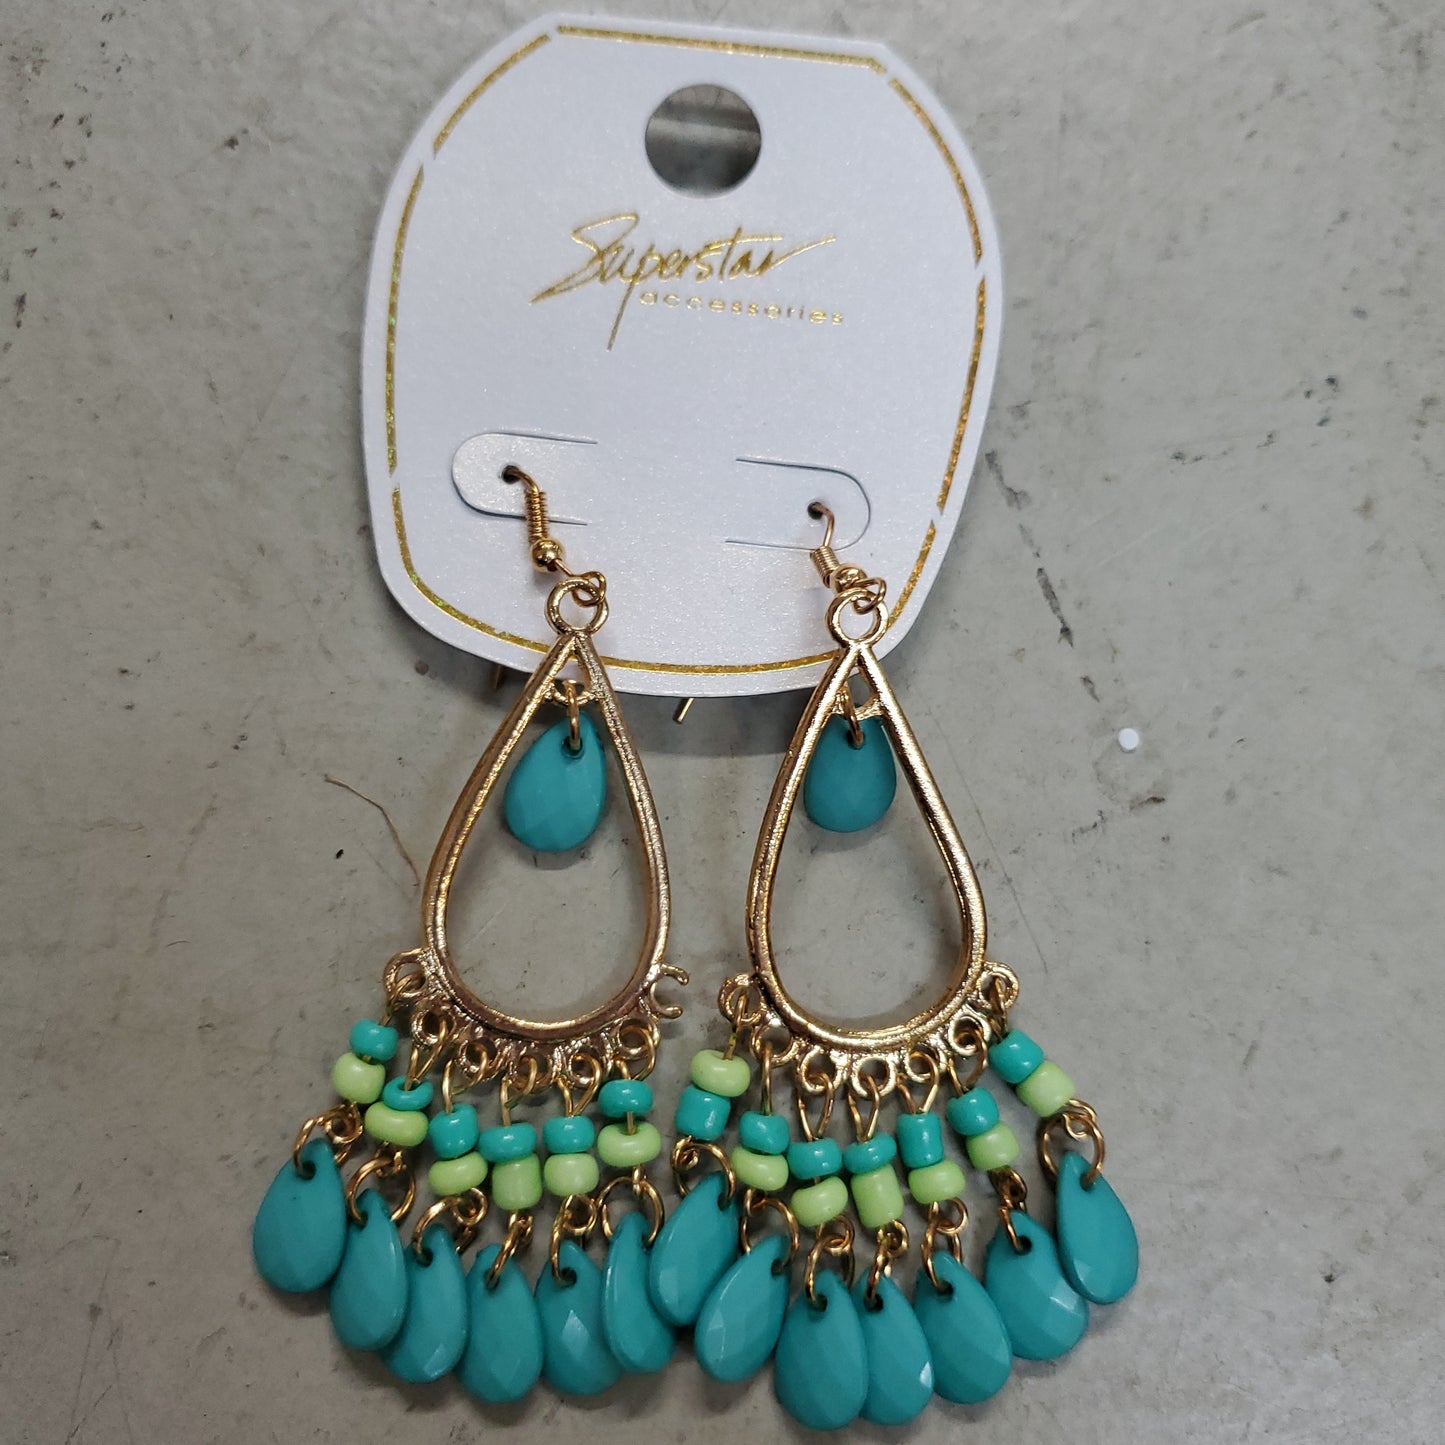 Under the Sea Earring